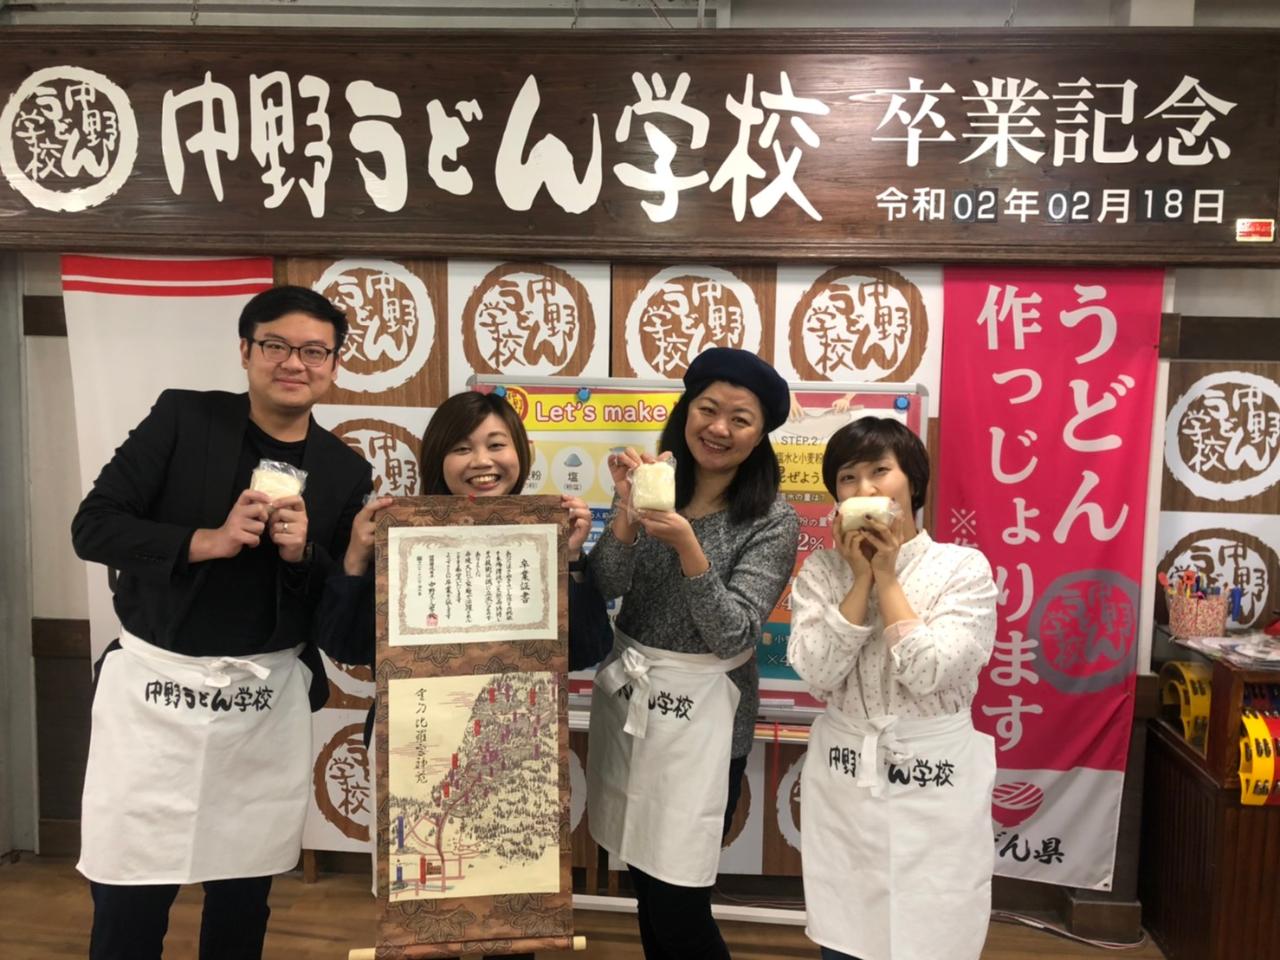 Udon Making Class & a One Way Bus Ticket To/From Takamatsu Airport